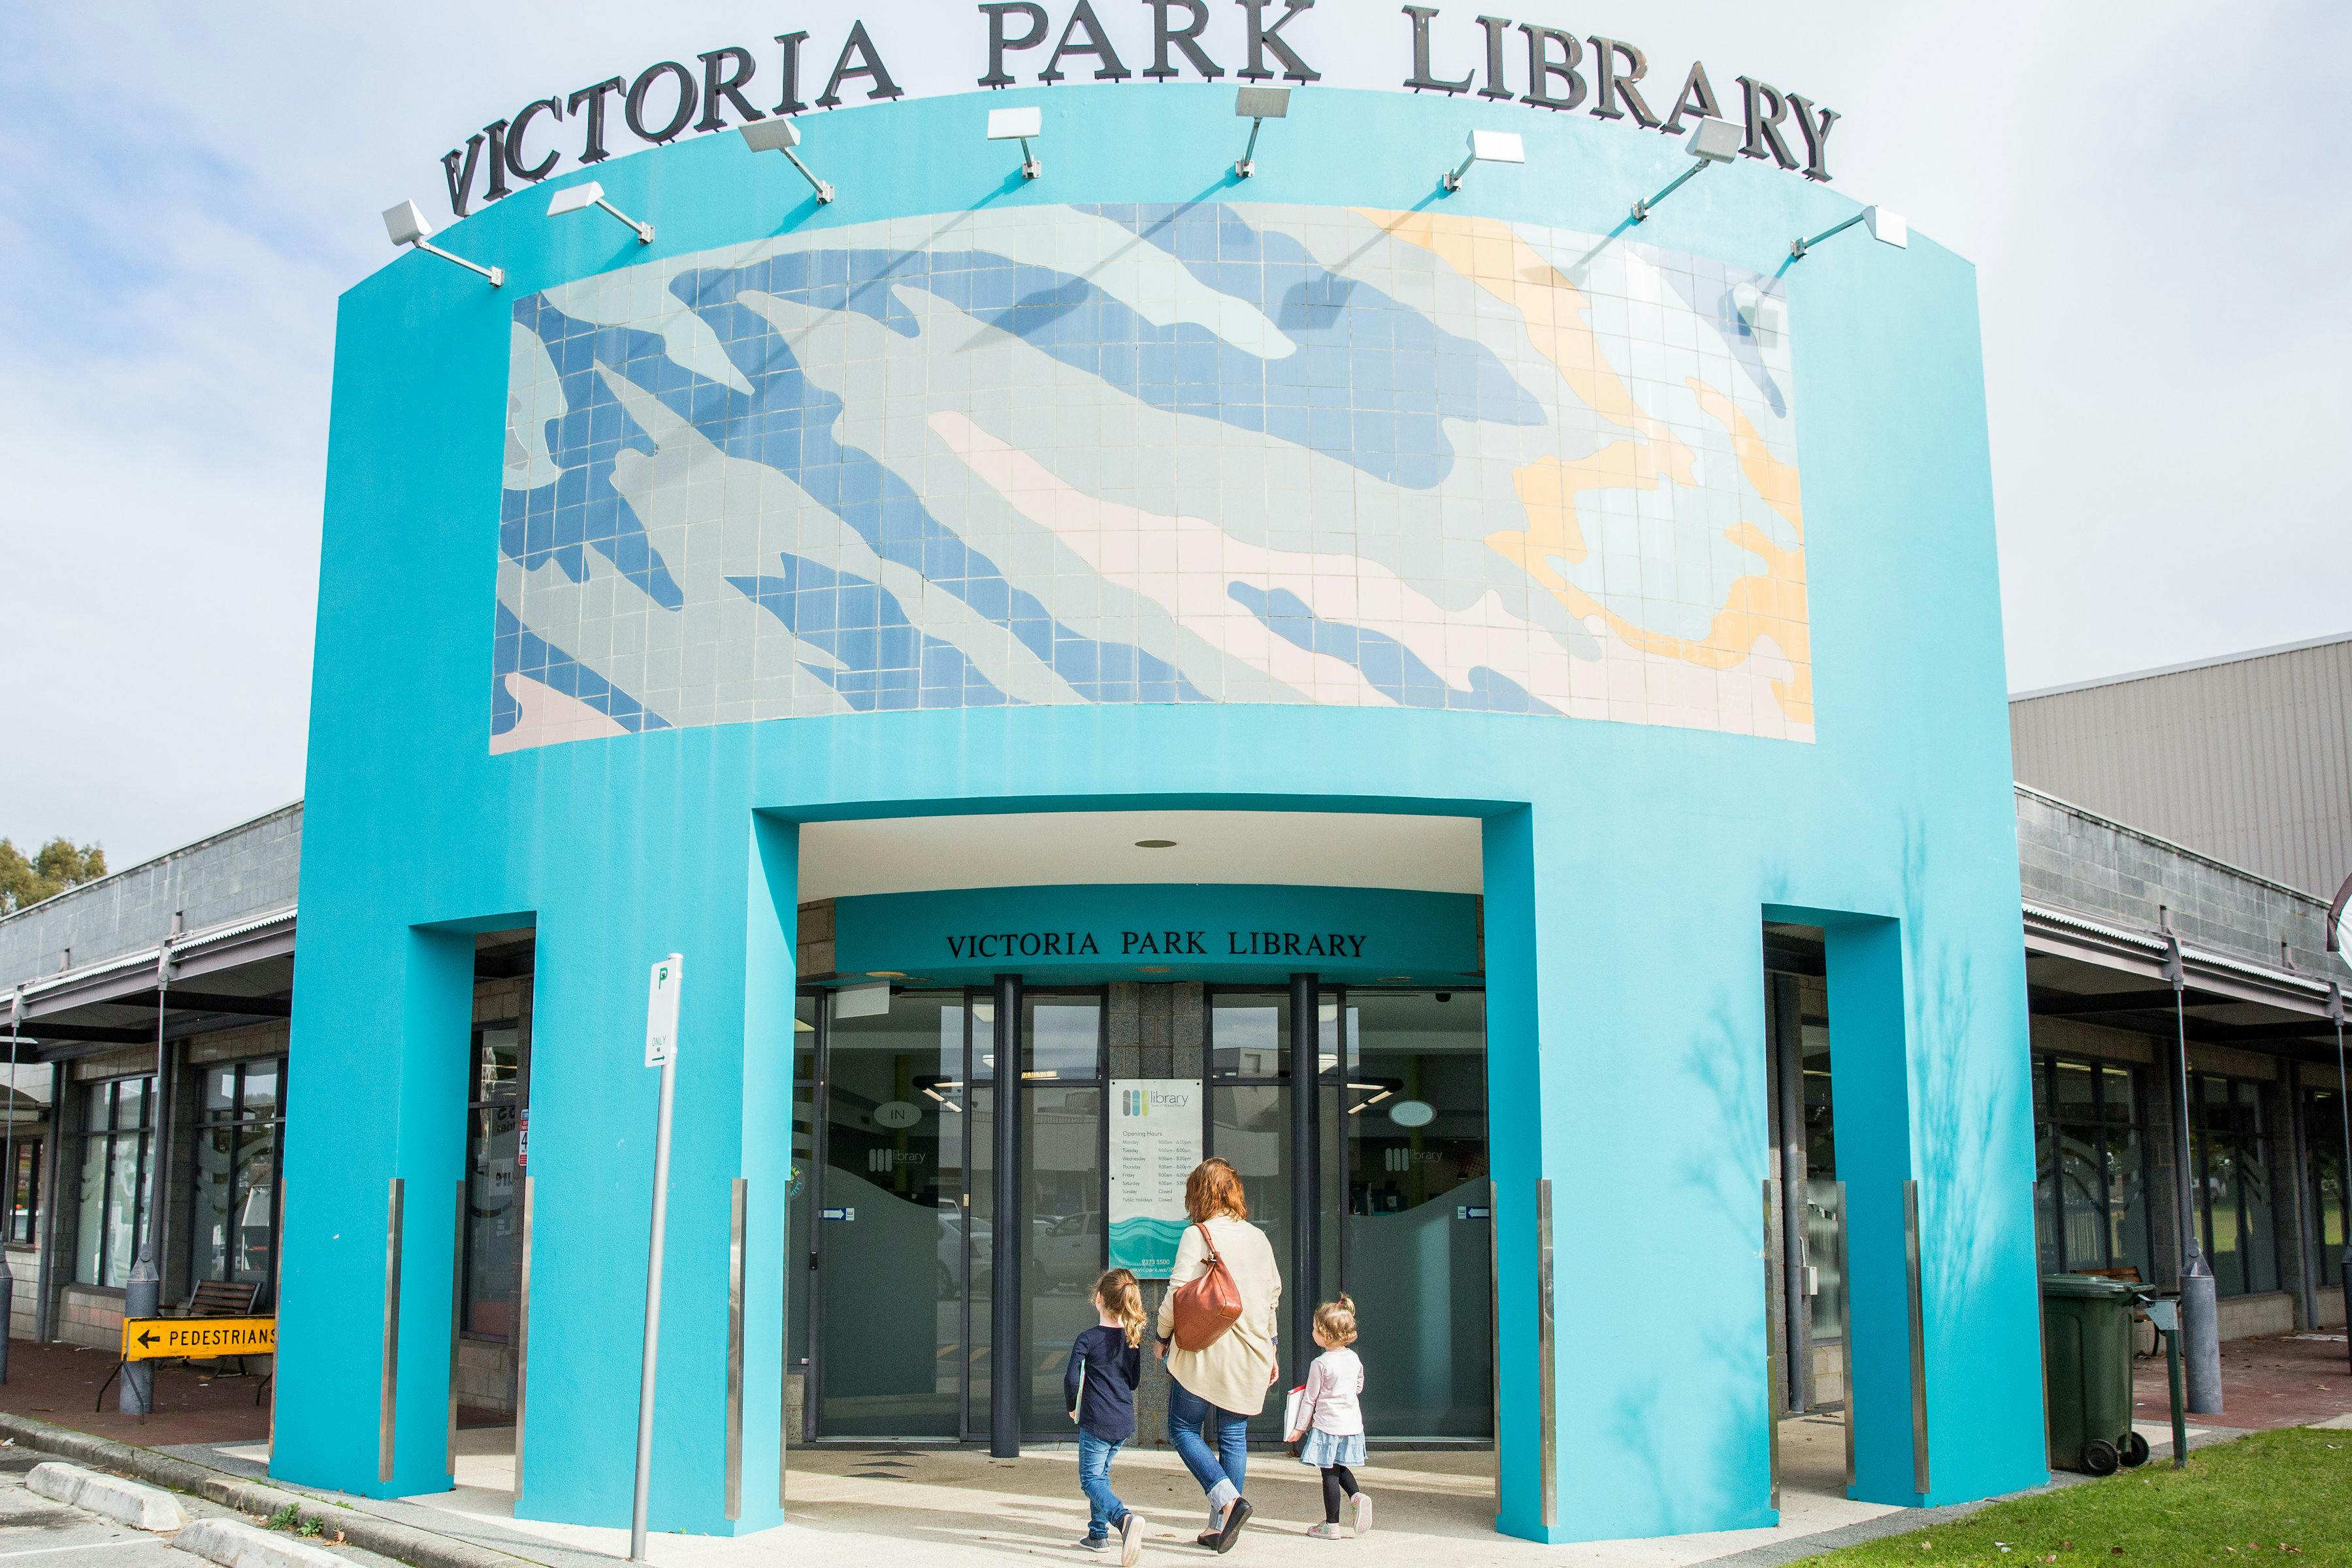 Town of Victoria Park Library